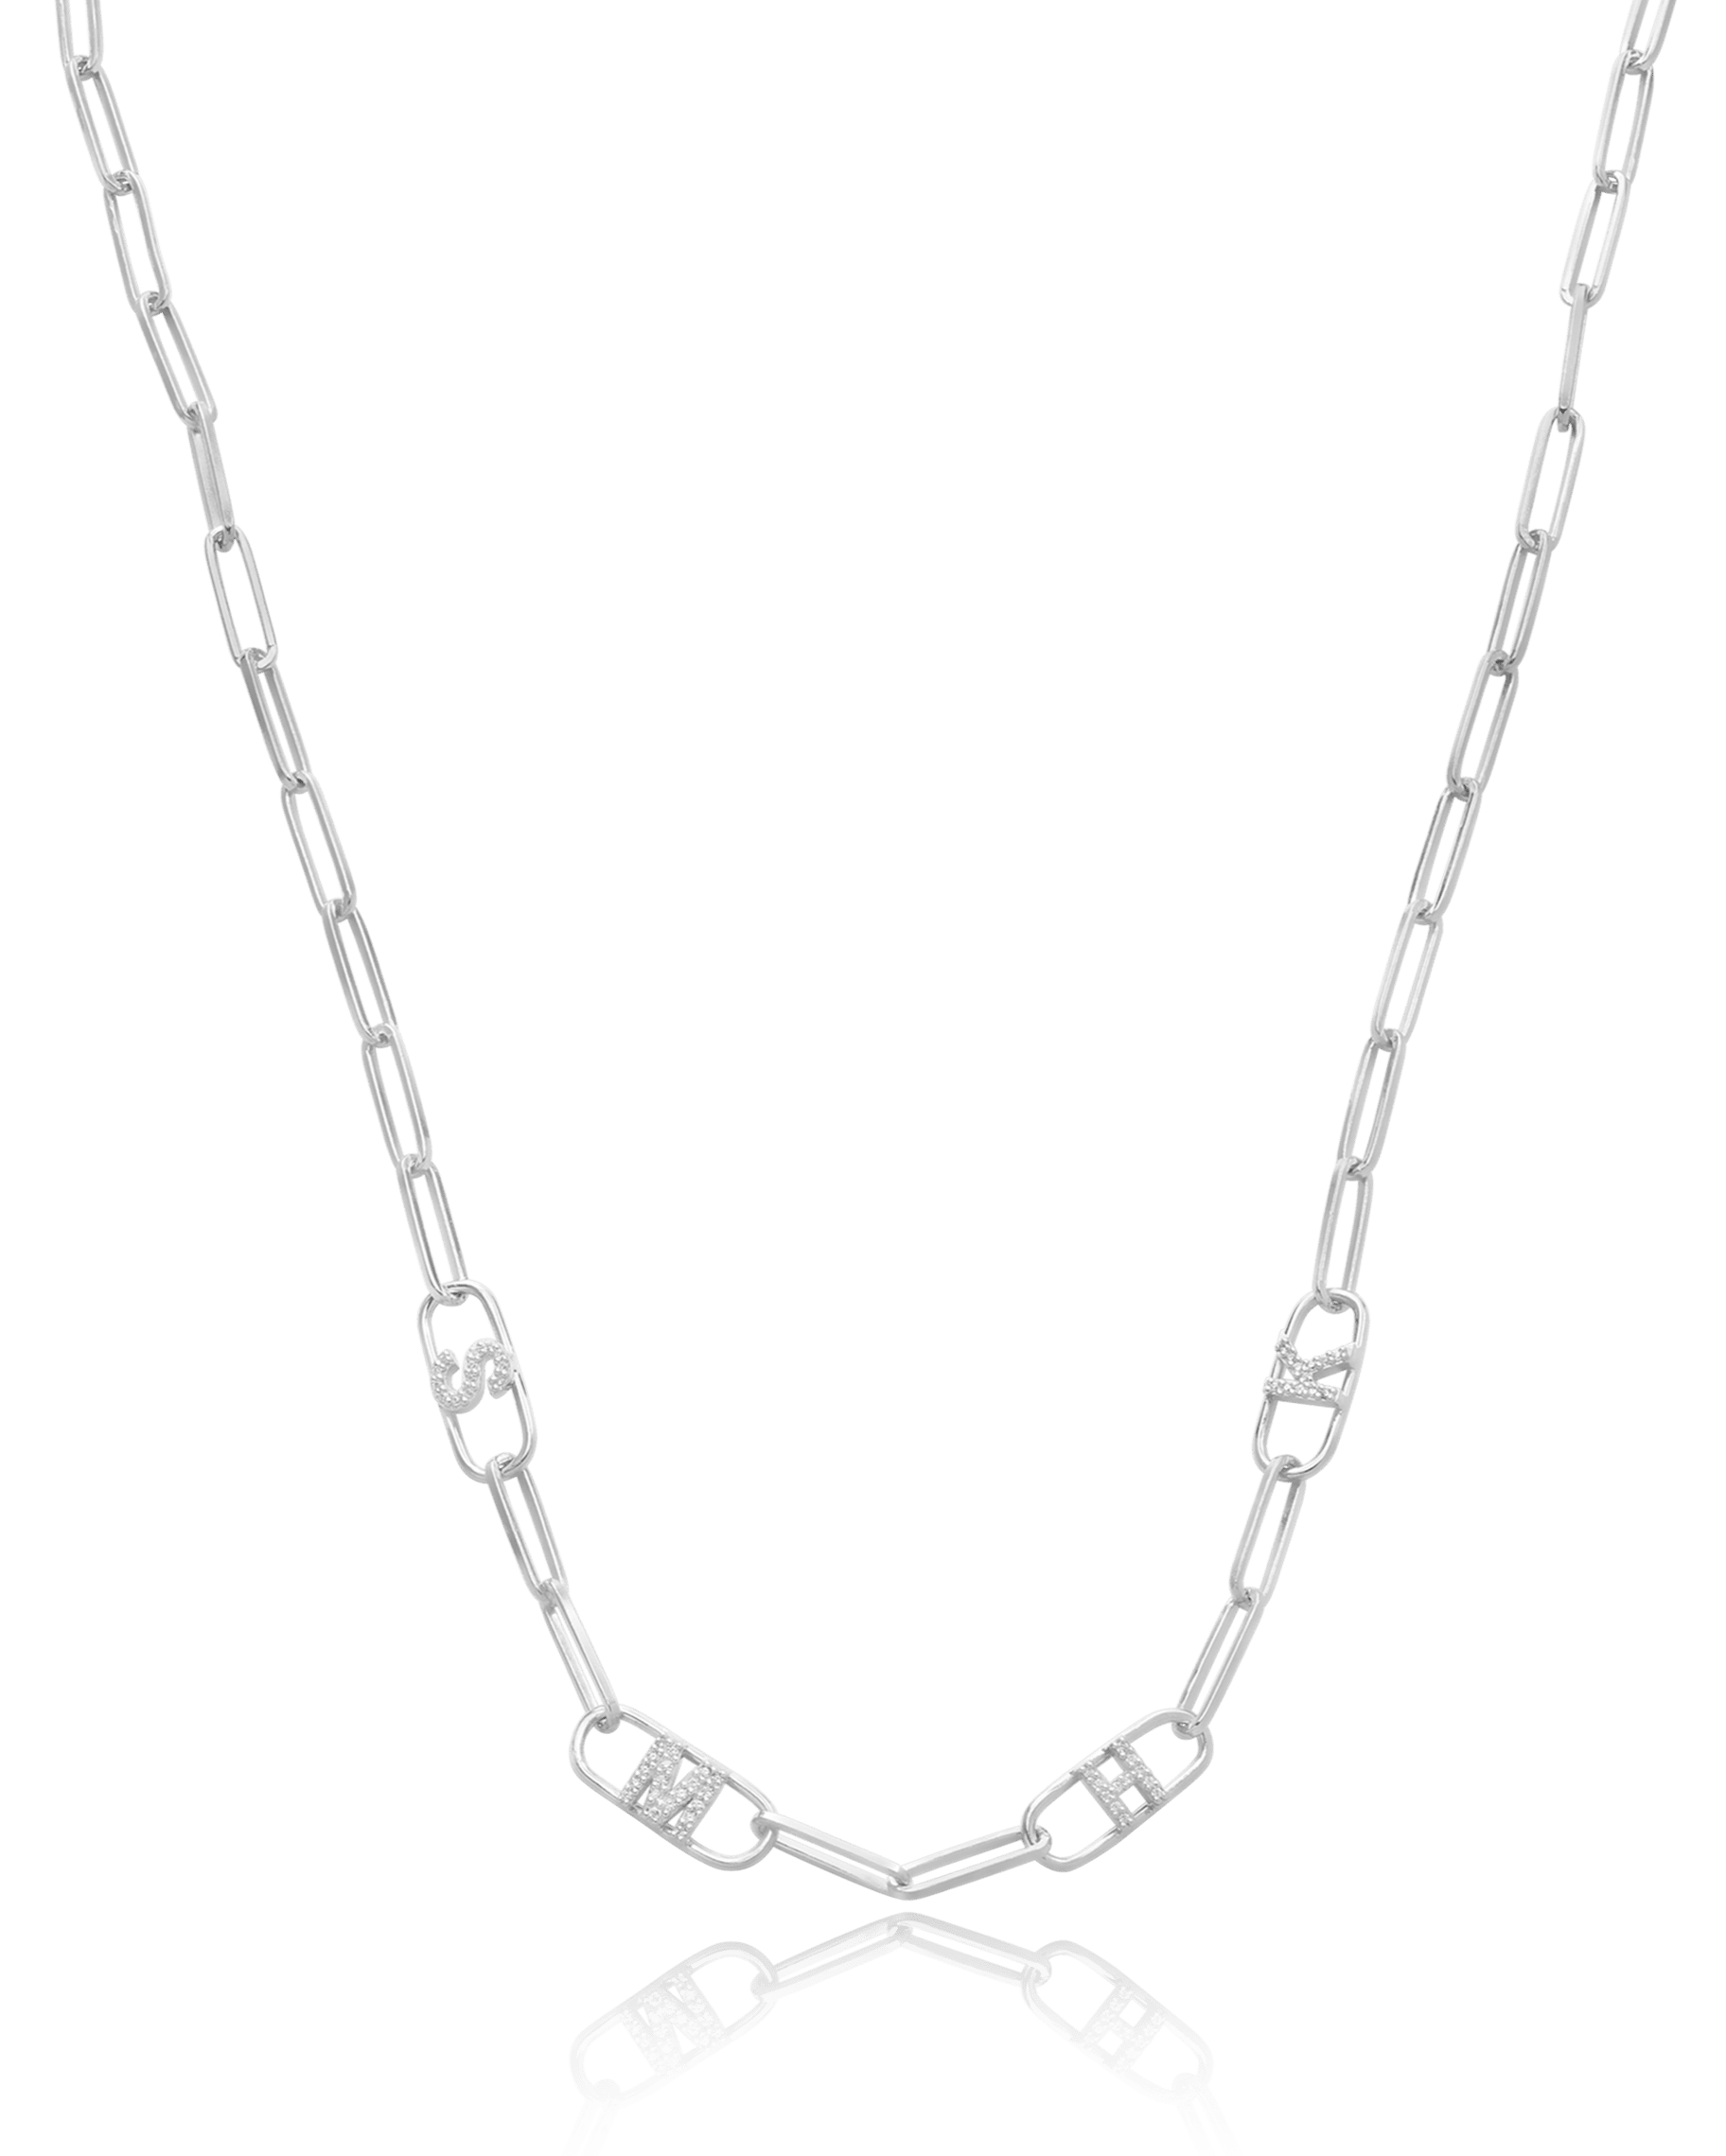 Initials Link Necklace - 925 Sterling Silver Necklaces magal-dev 1 Initial 16” 